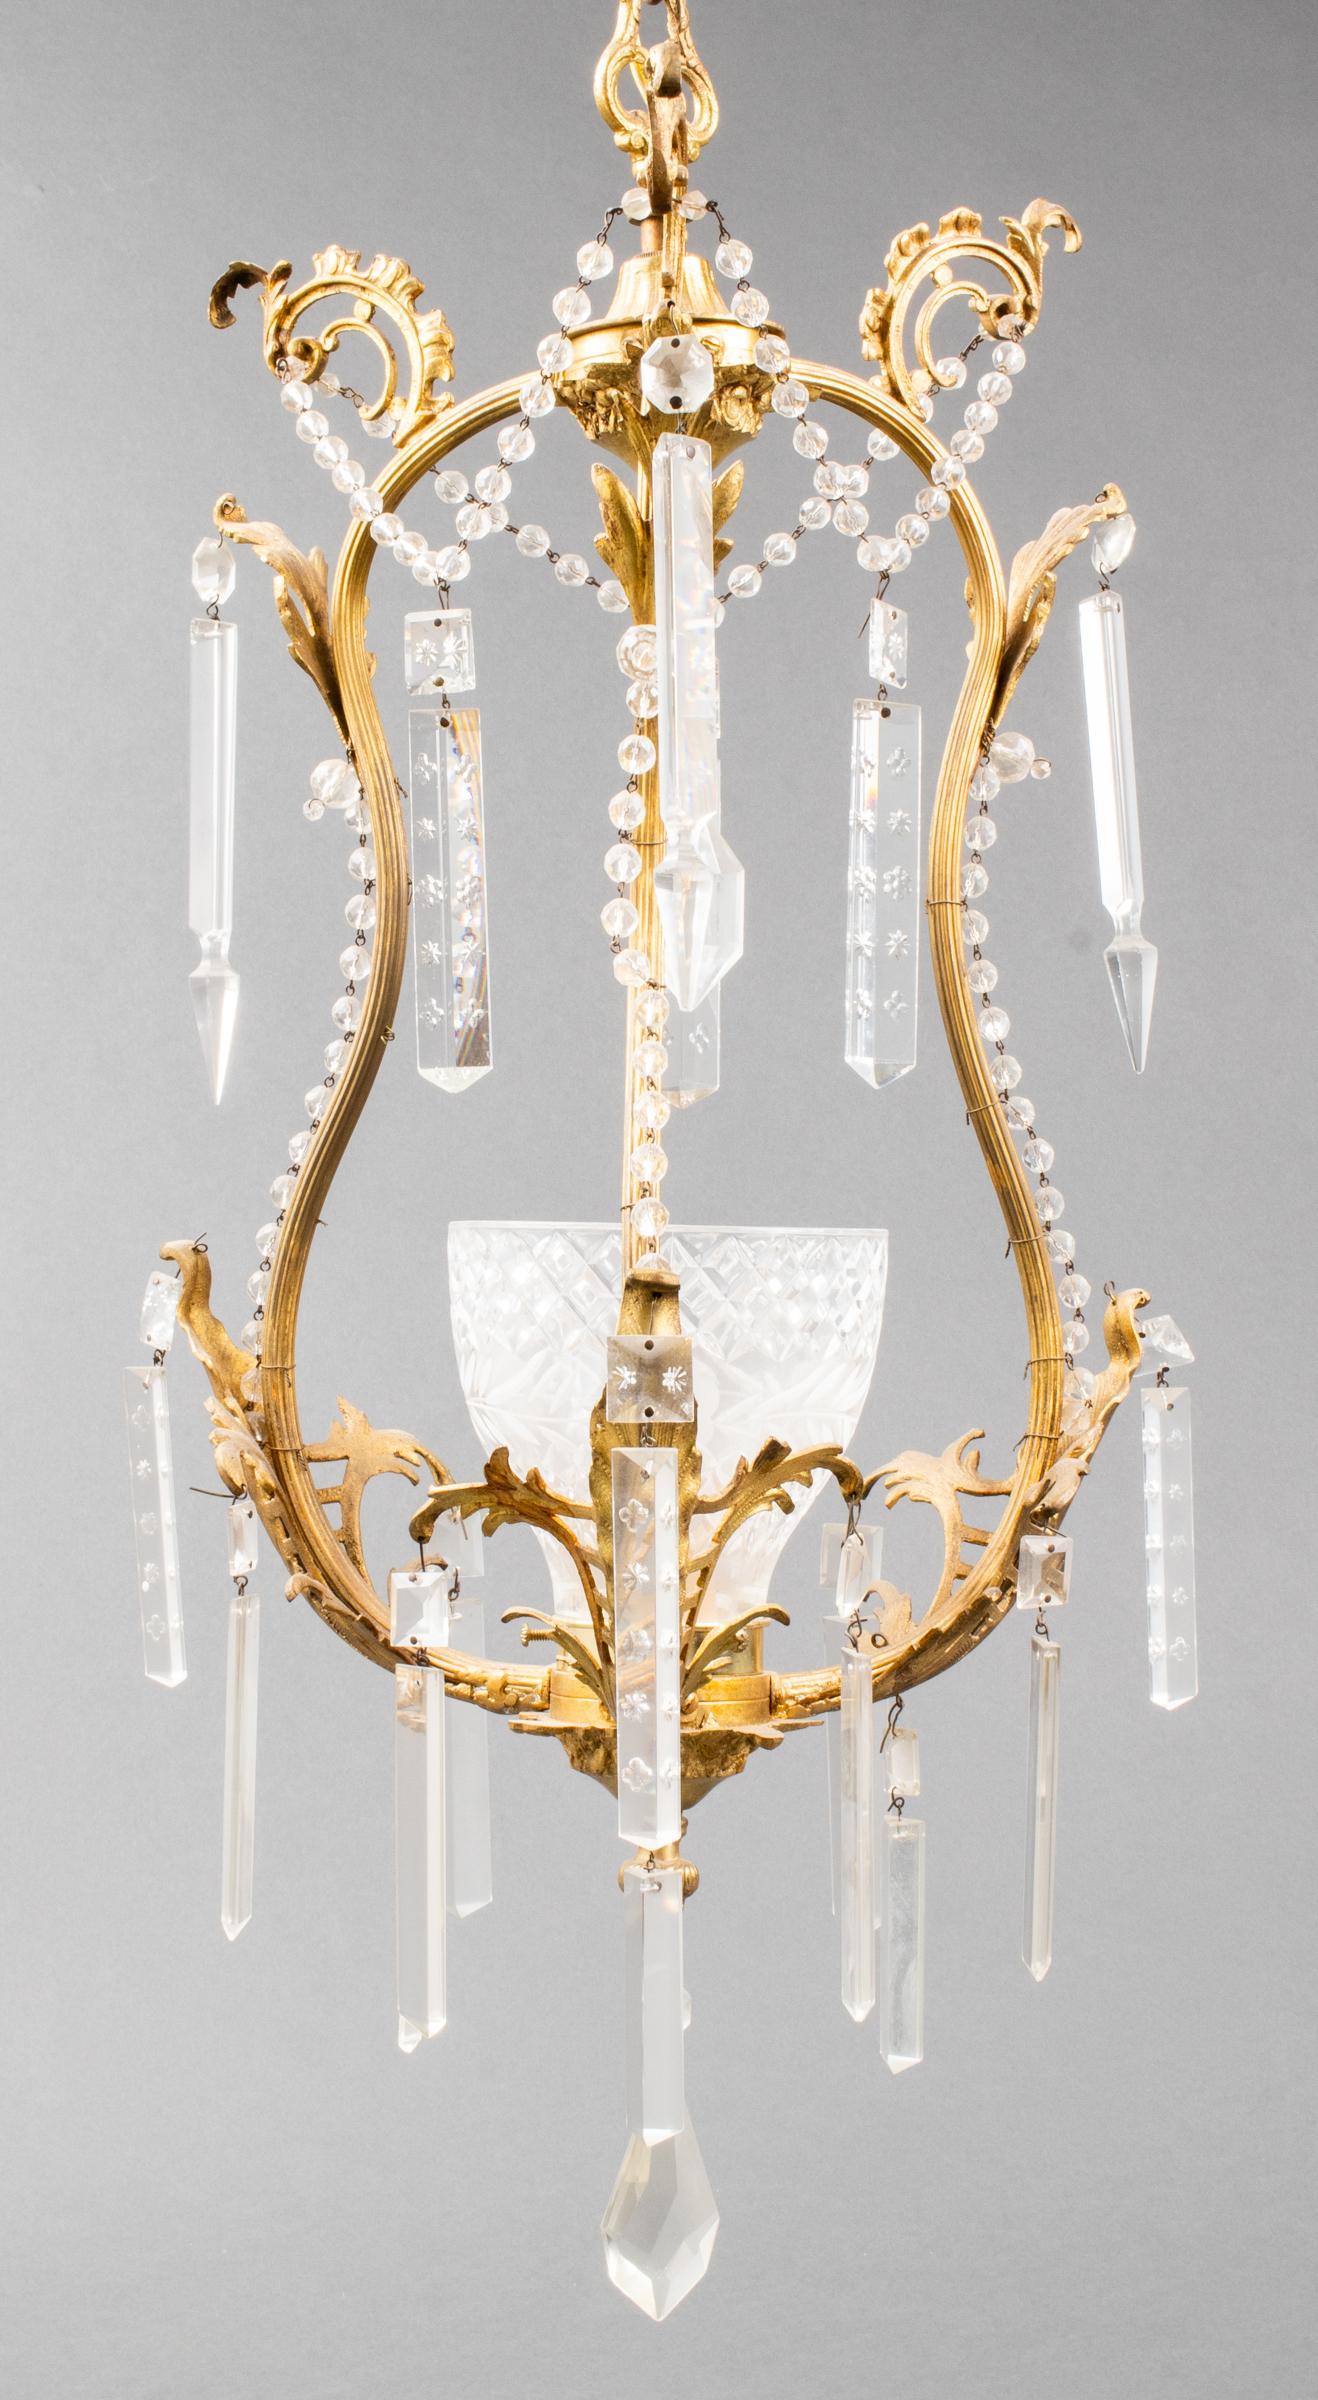 French Rococo style gilt brass and crystal pendant, with central cut crystal shade within brass frame with scrolled acanthus leaf motifs. Measures: 30